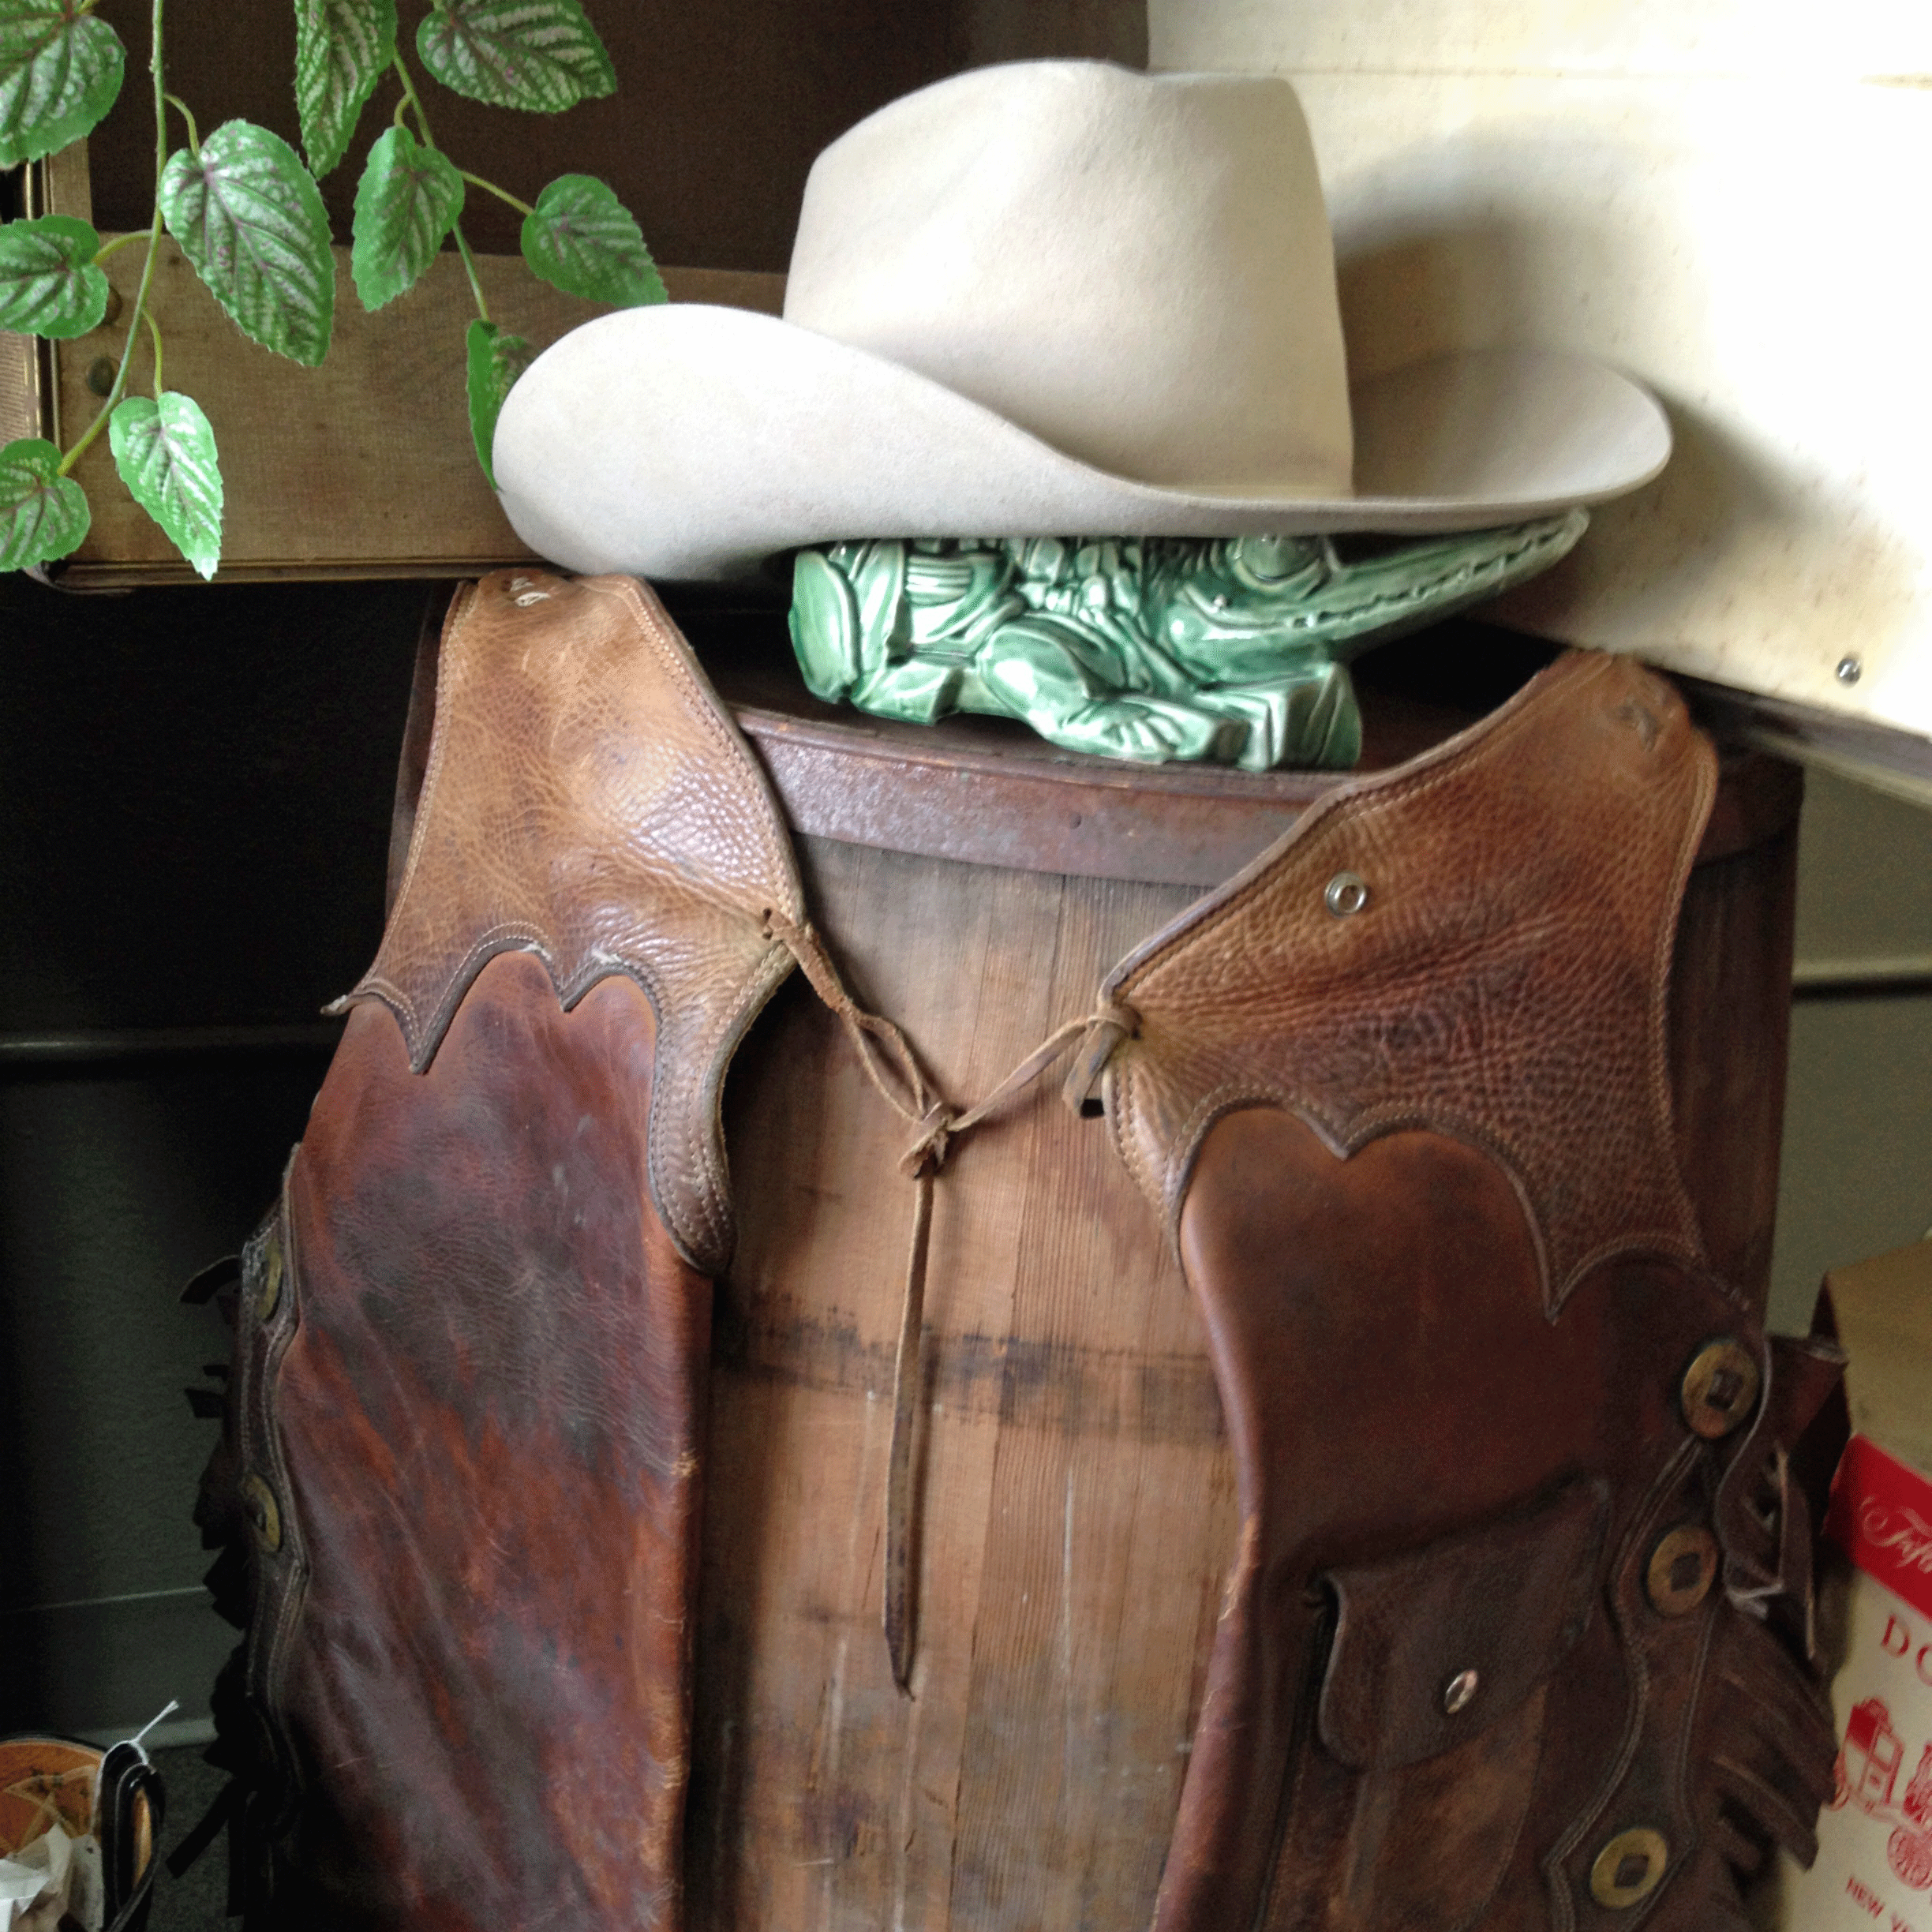 Cowboys can slip into western glamping style with this leather vest and hat.